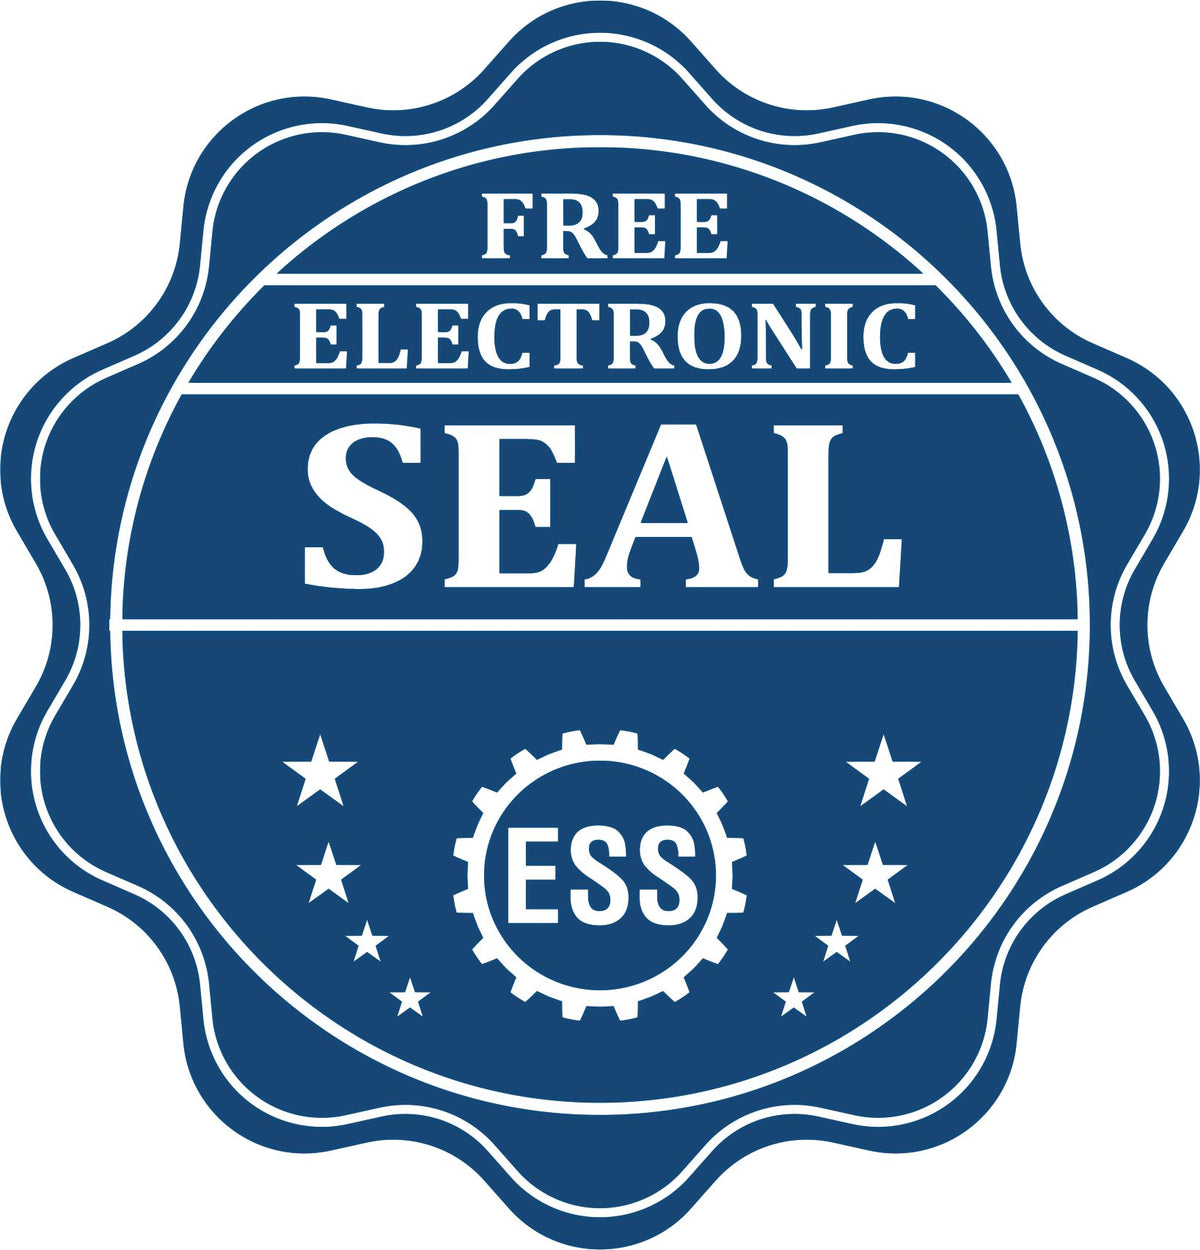 A badge showing a free electronic seal for the Gift Wyoming Land Surveyor Seal with stars and the ESS gear on the emblem.